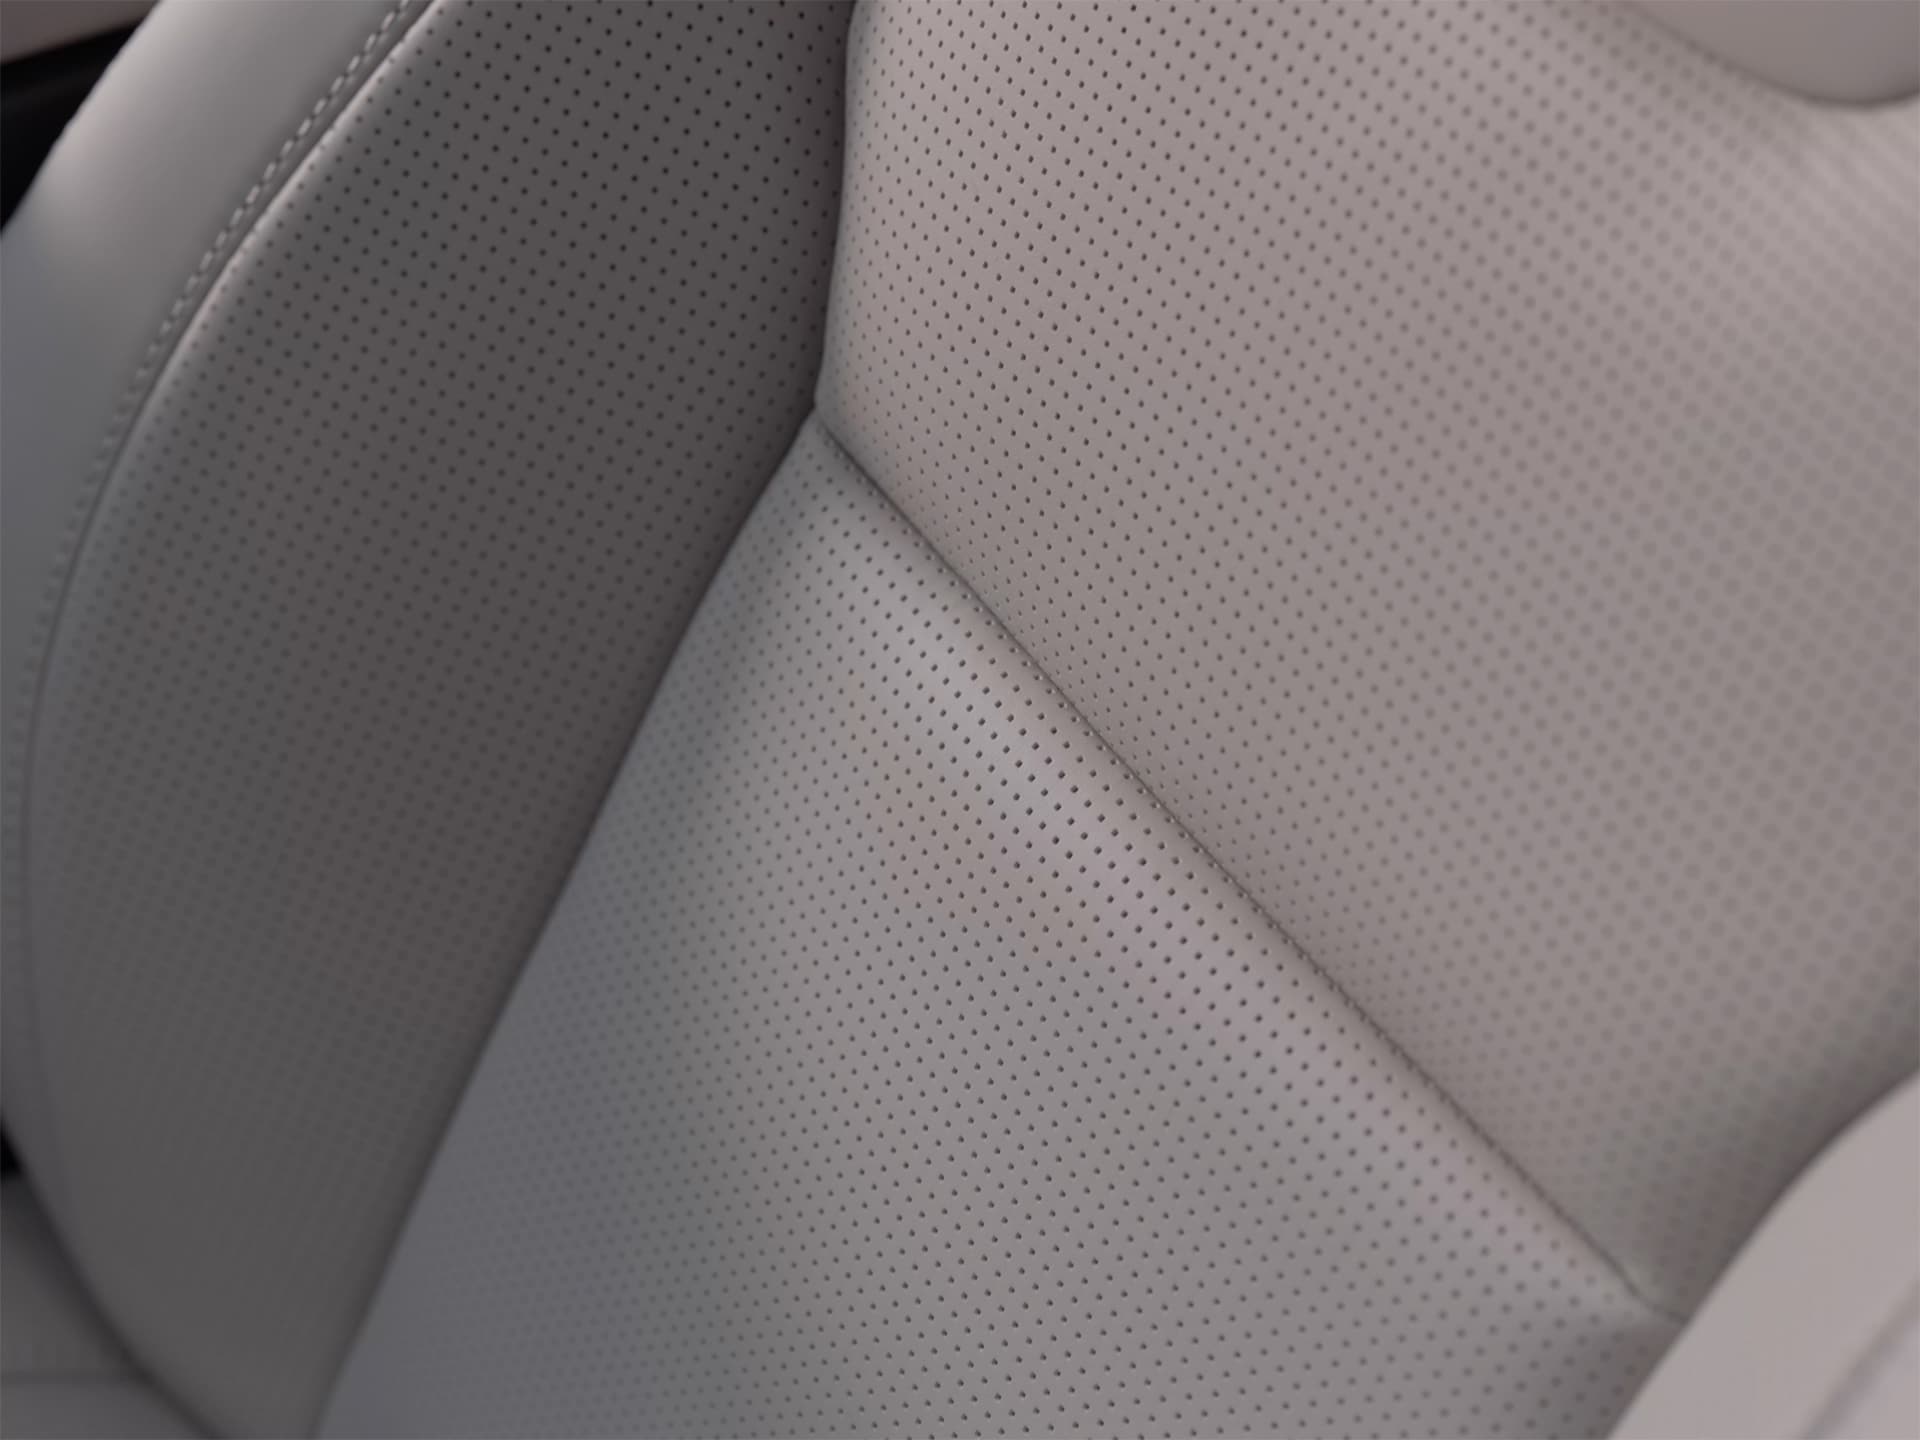 Nappa leather front seats in a Volvo V60 Cross Country.